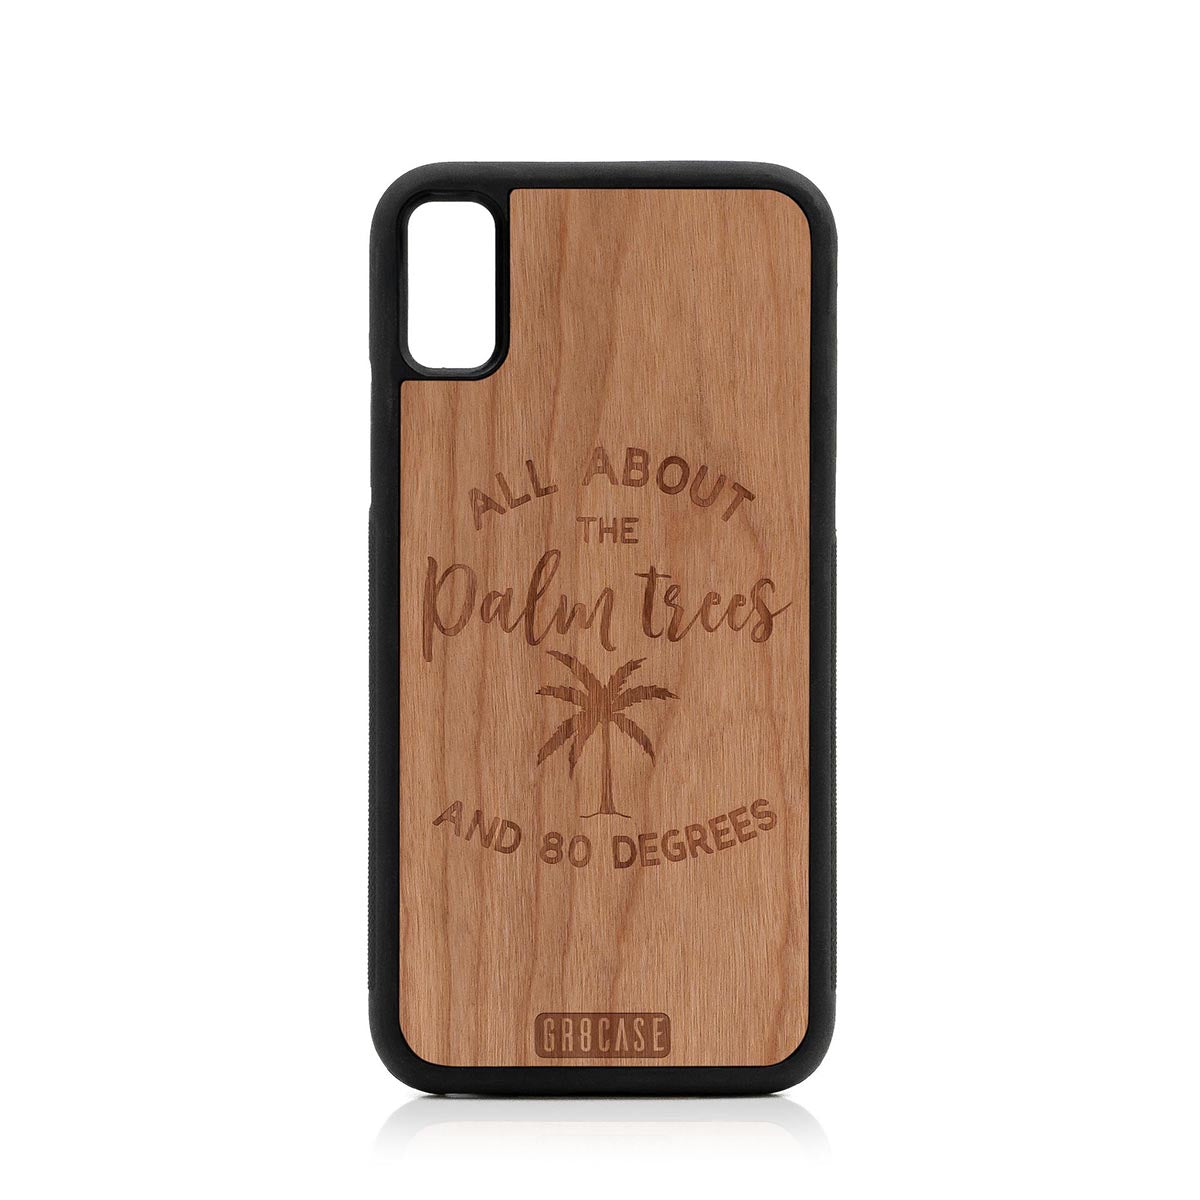 All About The Palm Trees and 80 Degrees Design Wood Case For iPhone XR by GR8CASE